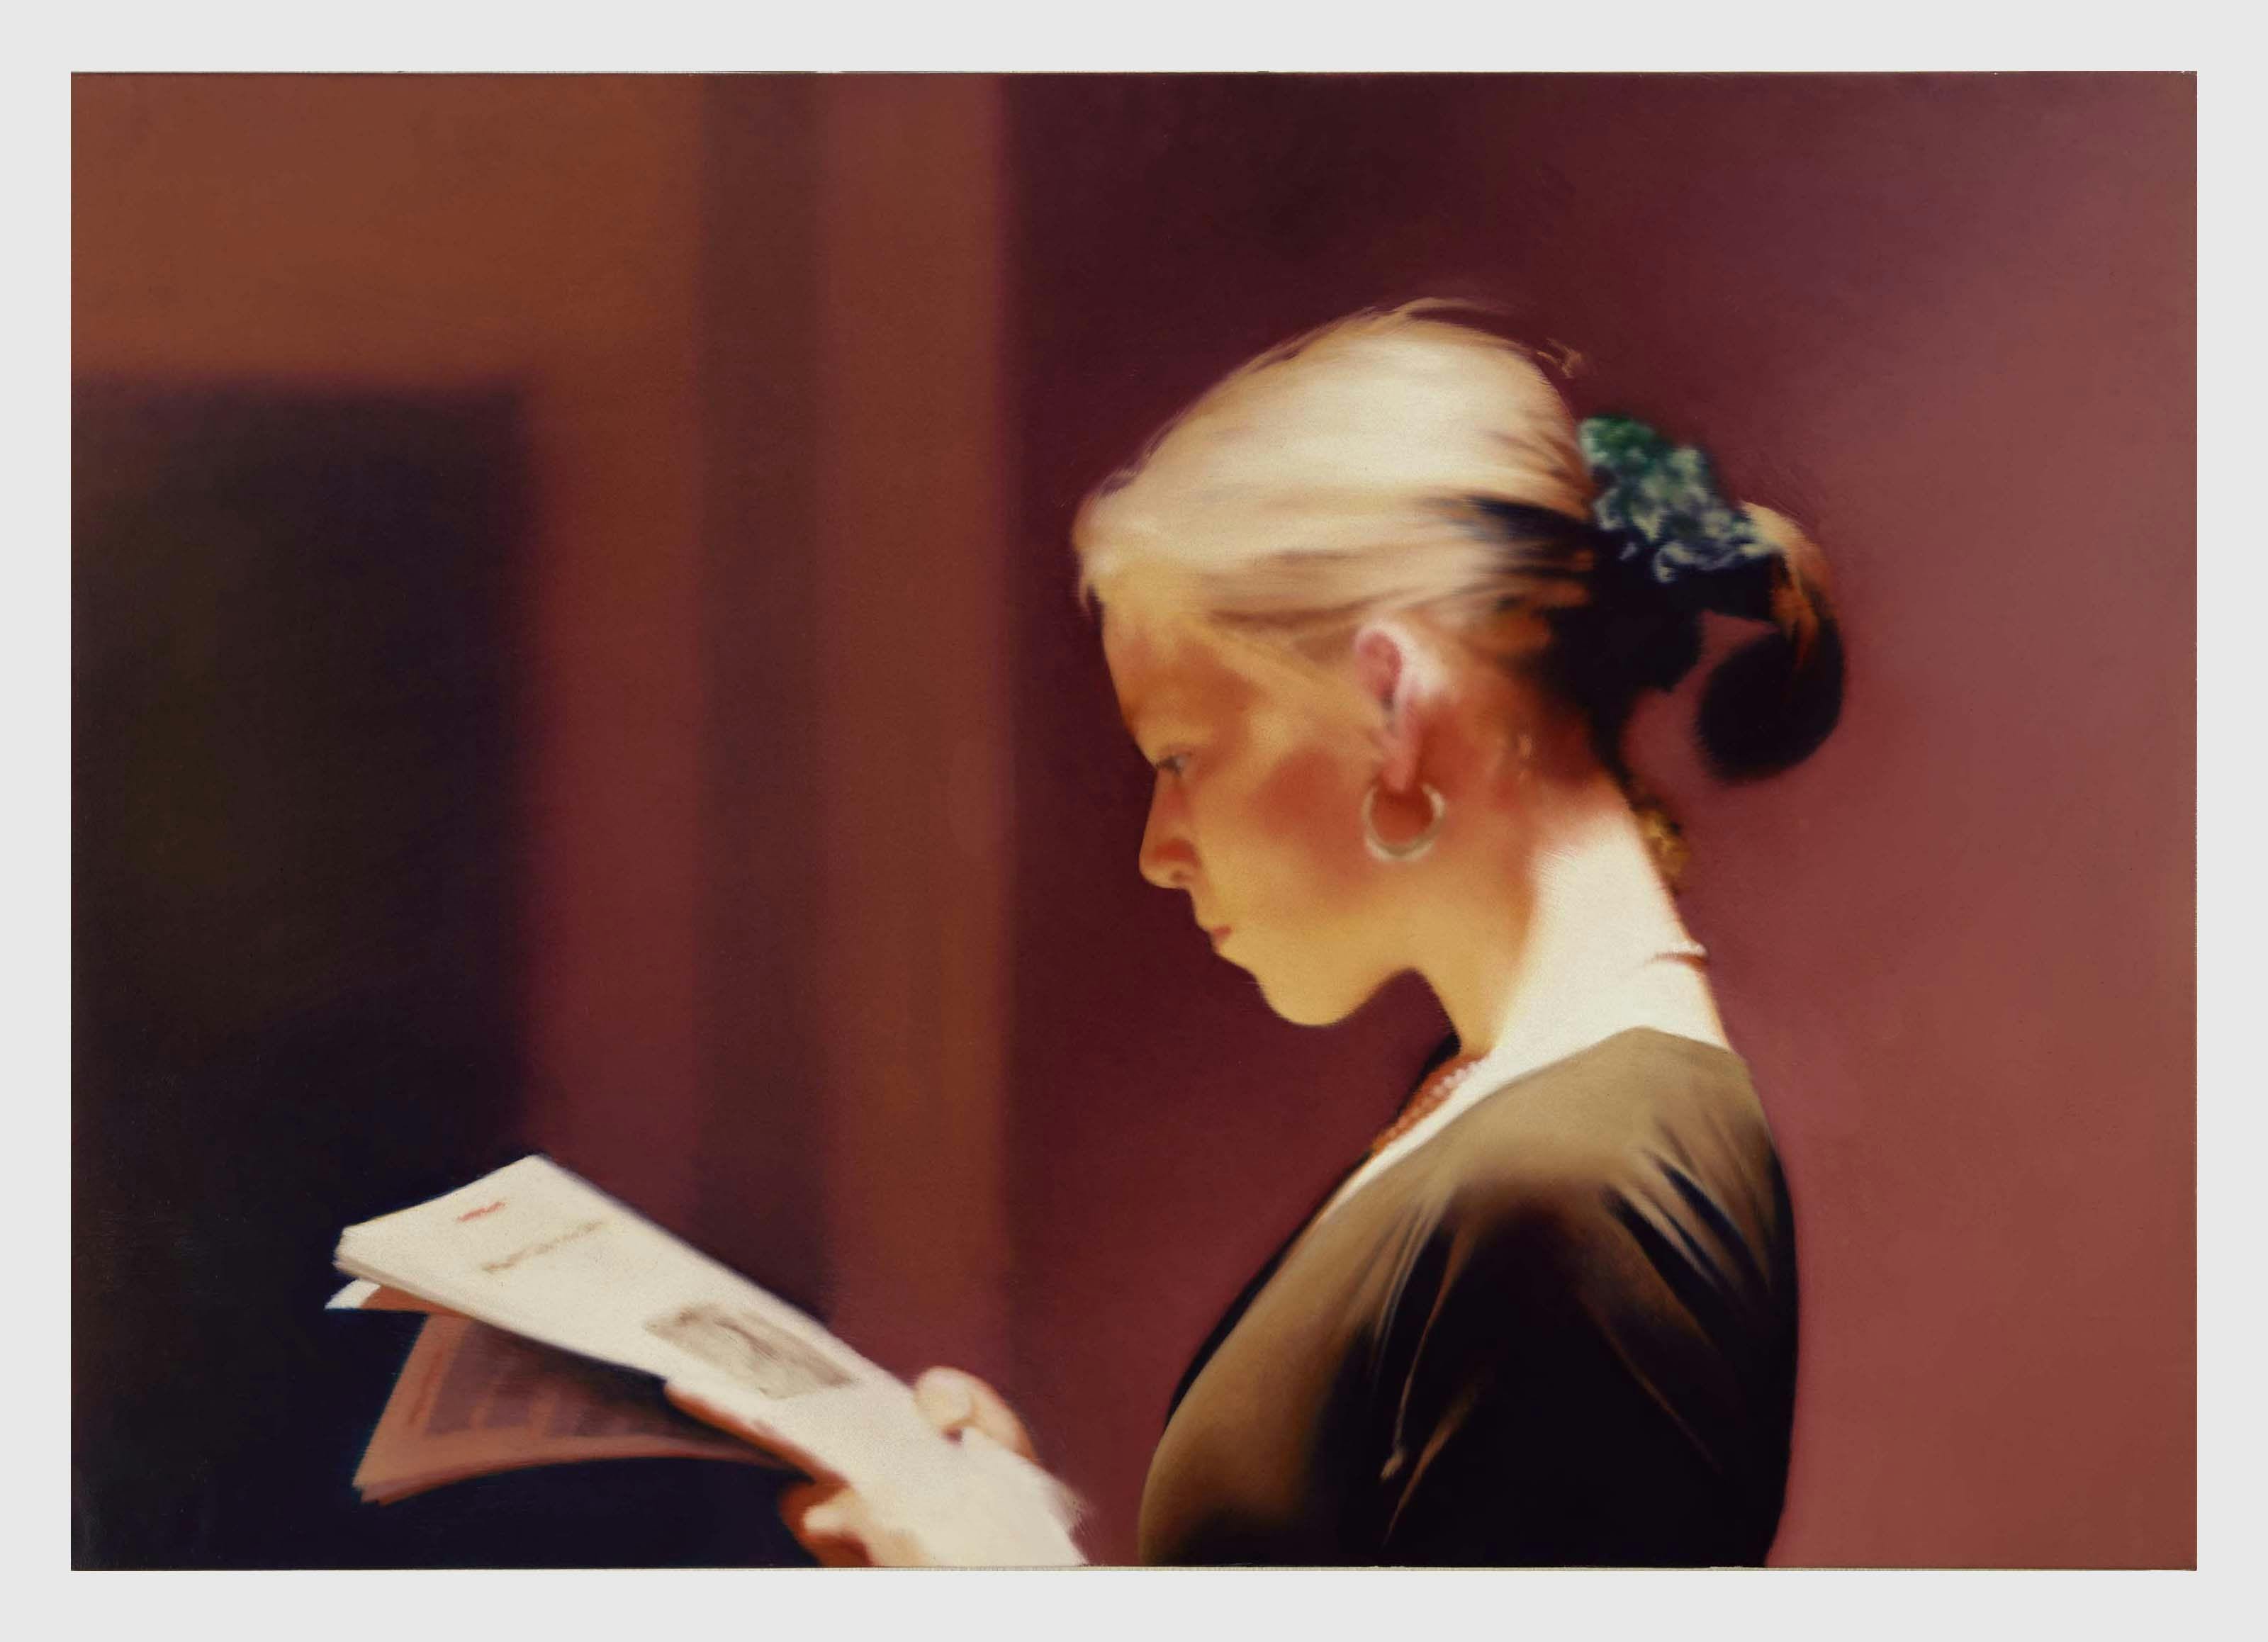 A painting by Gerhard Richter, titled Lesende (Reader), dated 1994.